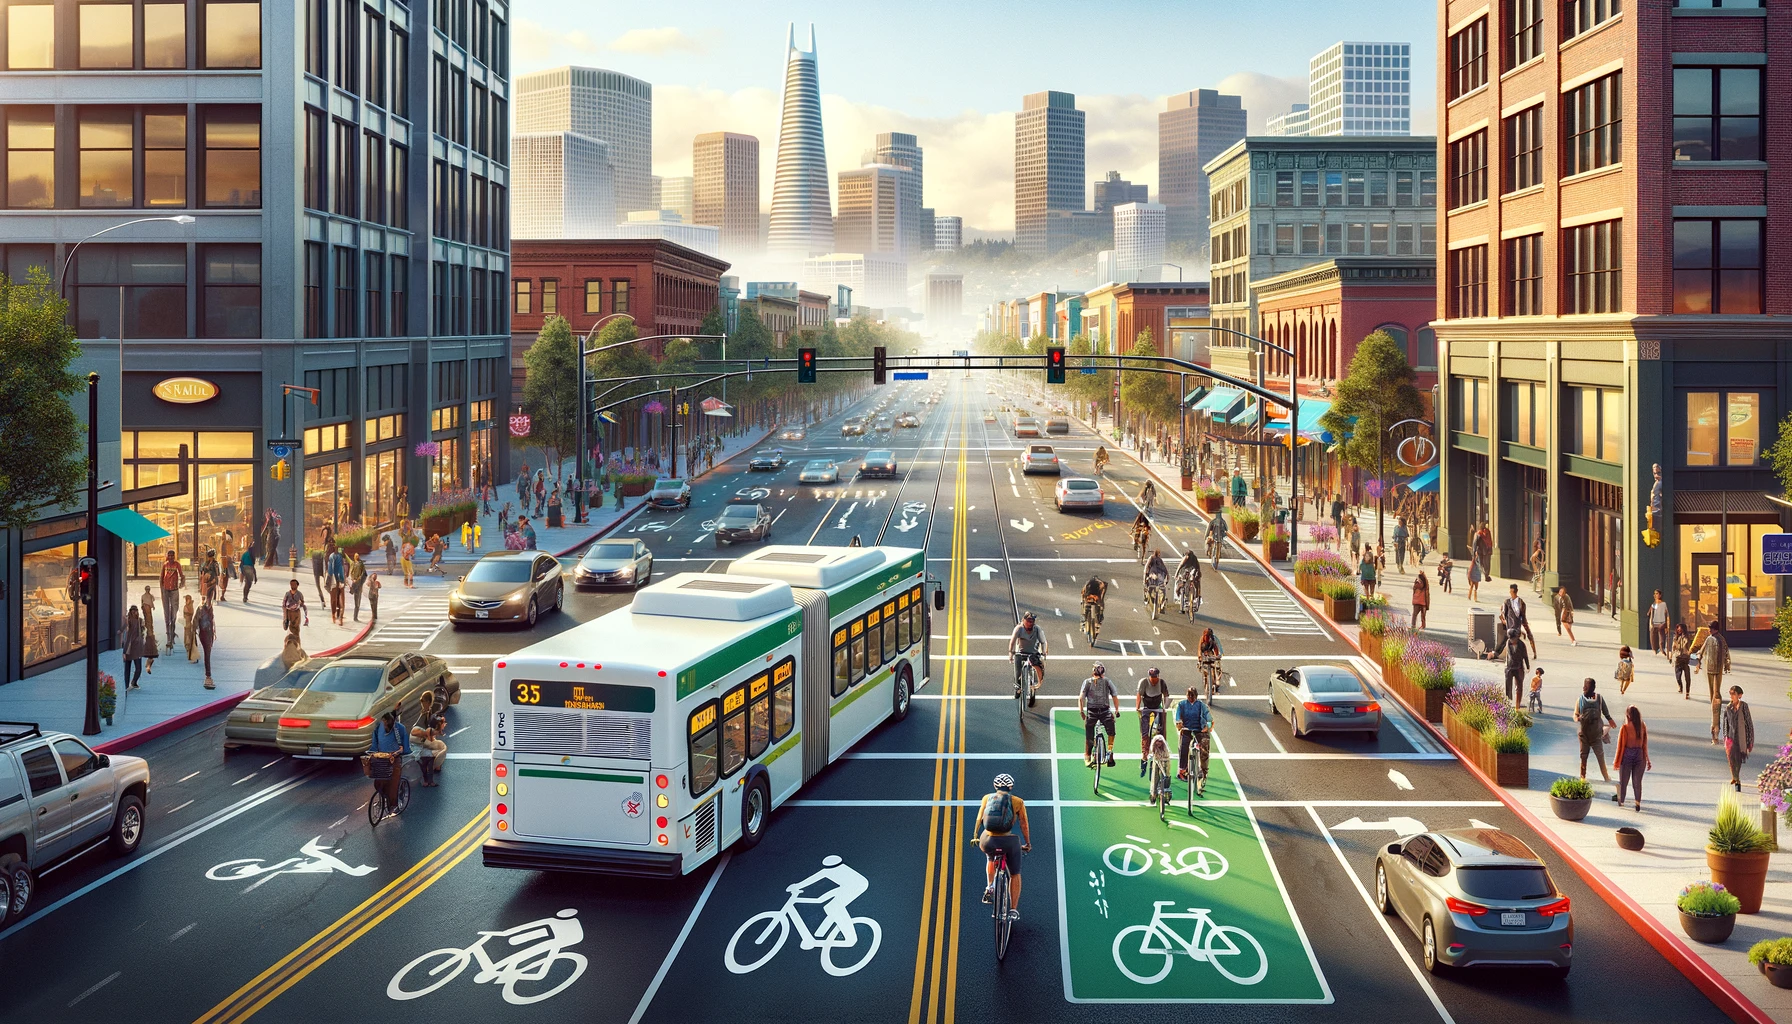 Cycling and Public Transit in Oakland